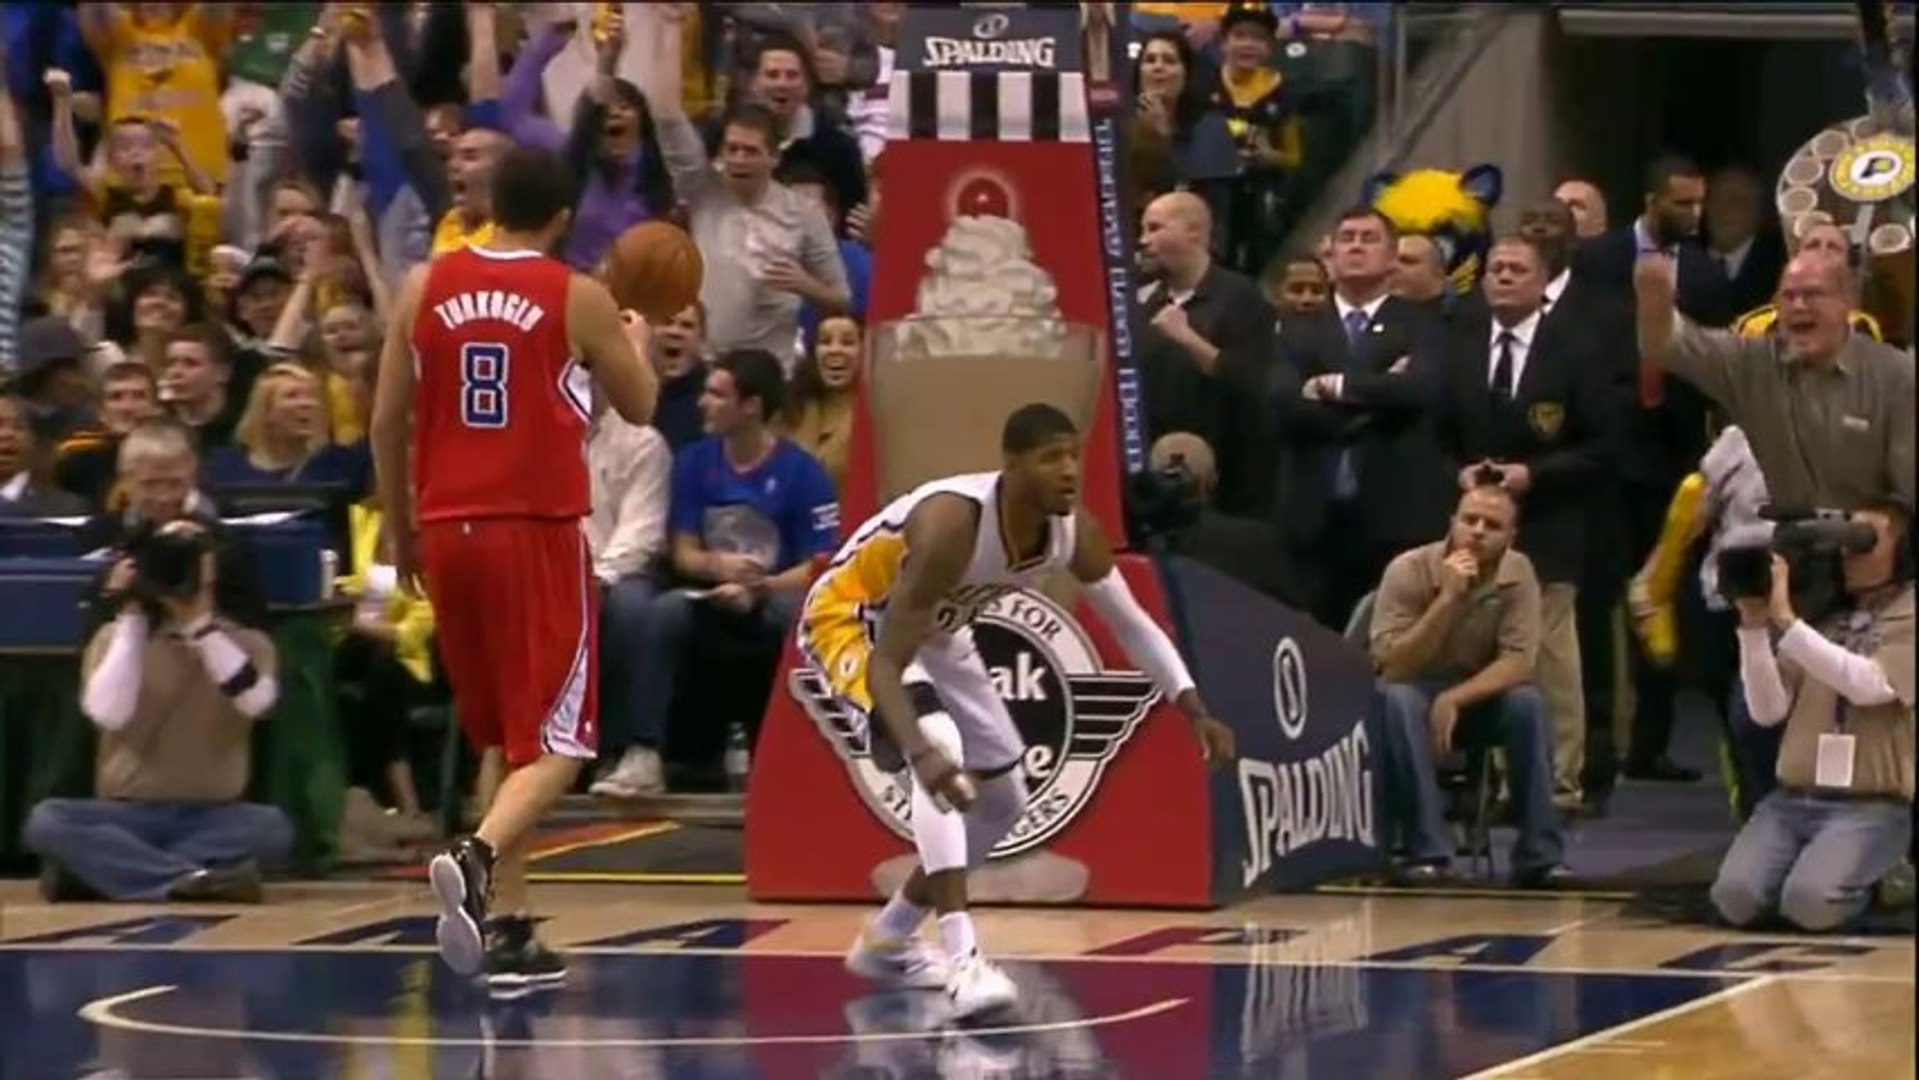 Paul George casually rose up for a 360 windmill dunk after the